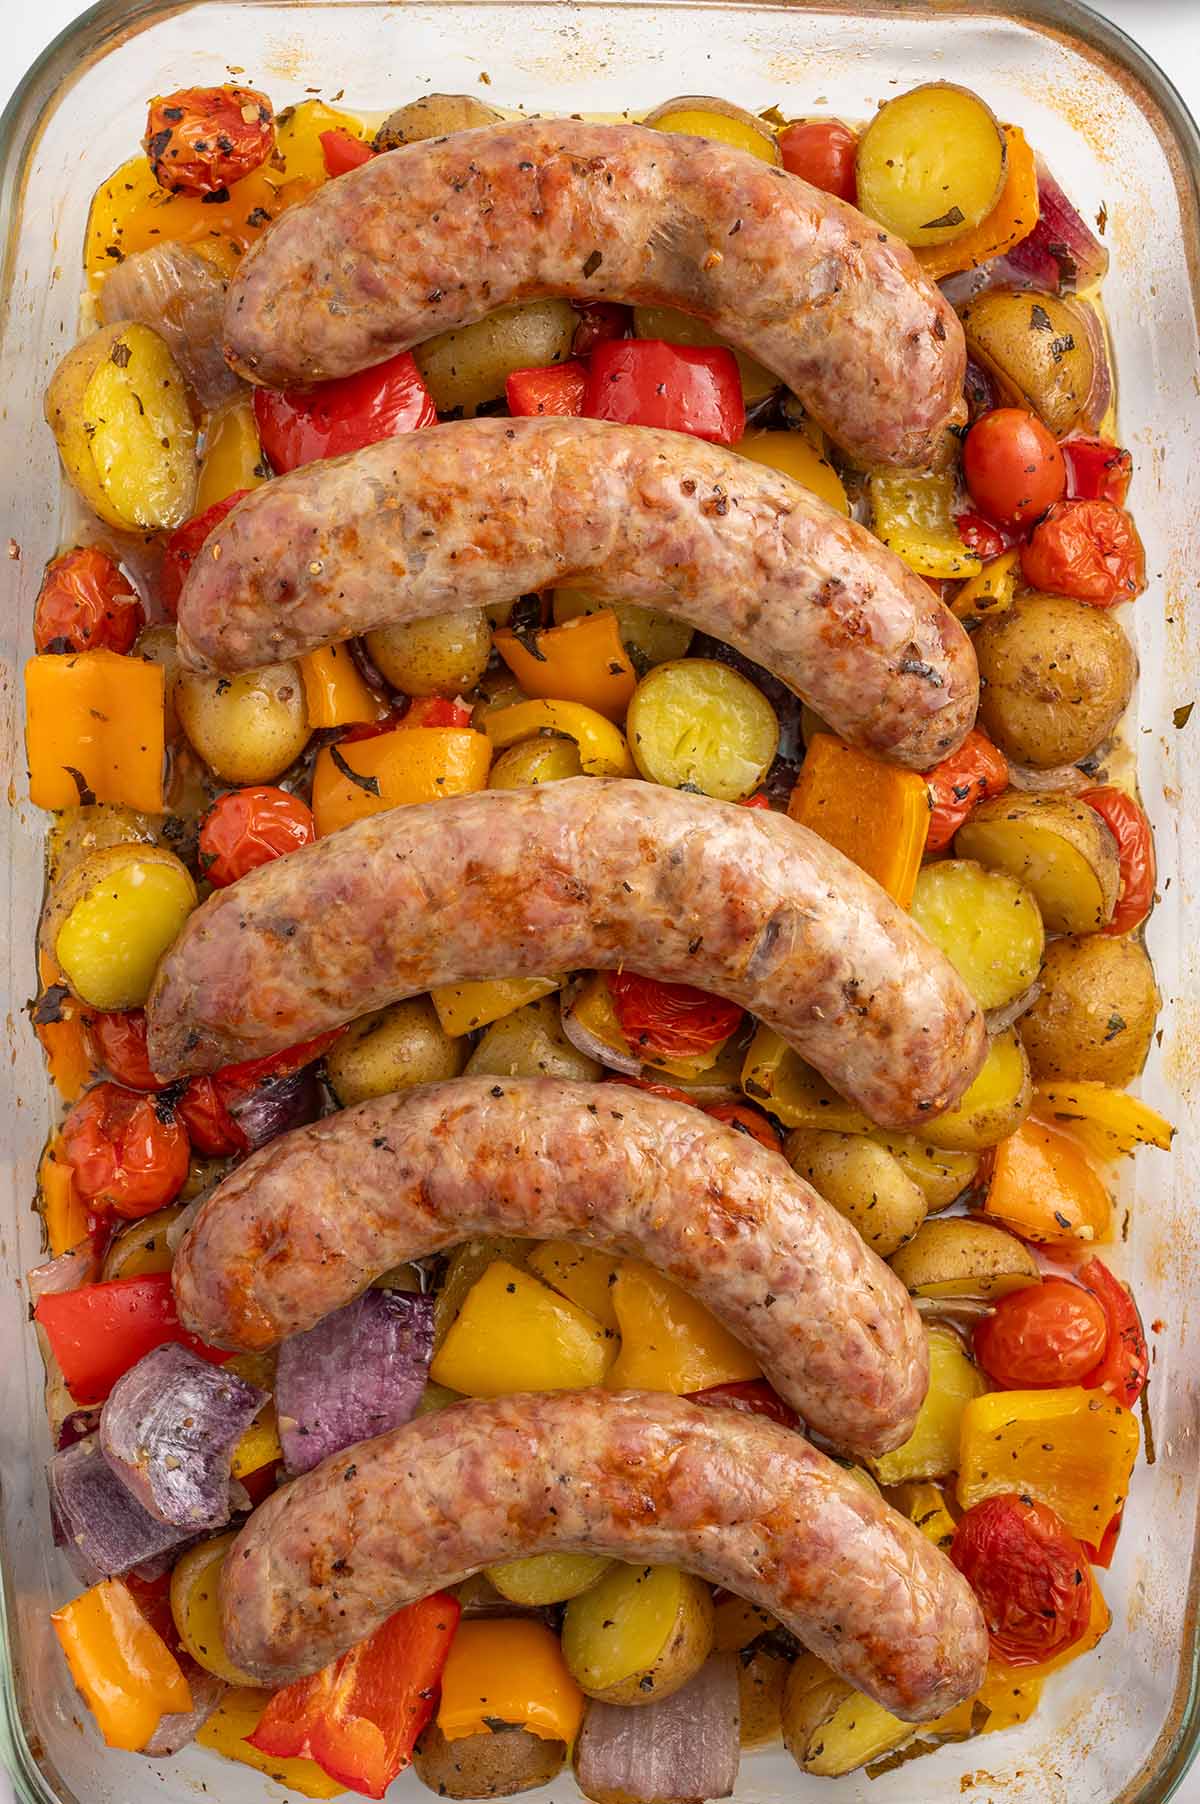 Baked Italian Sausage lined up in a baking dish.